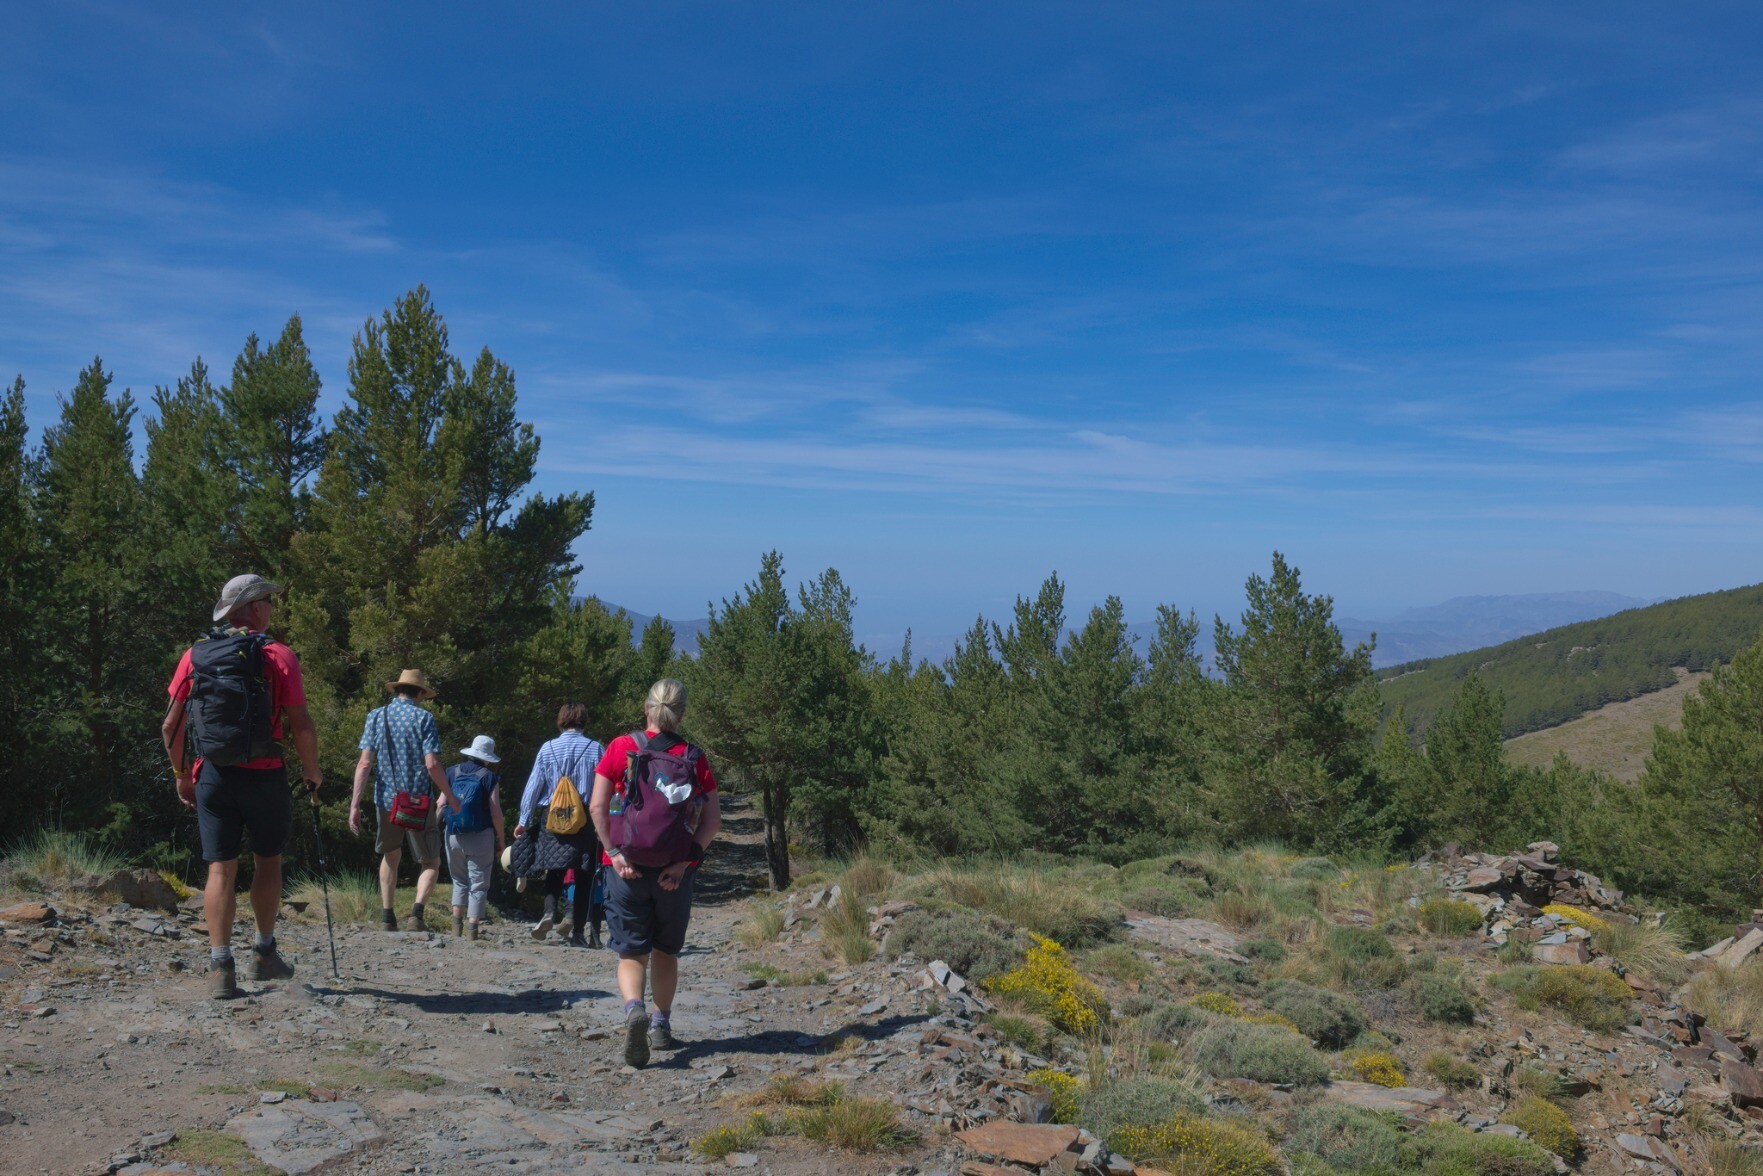 A group of hikers enter a forest, above is a huge blue sky